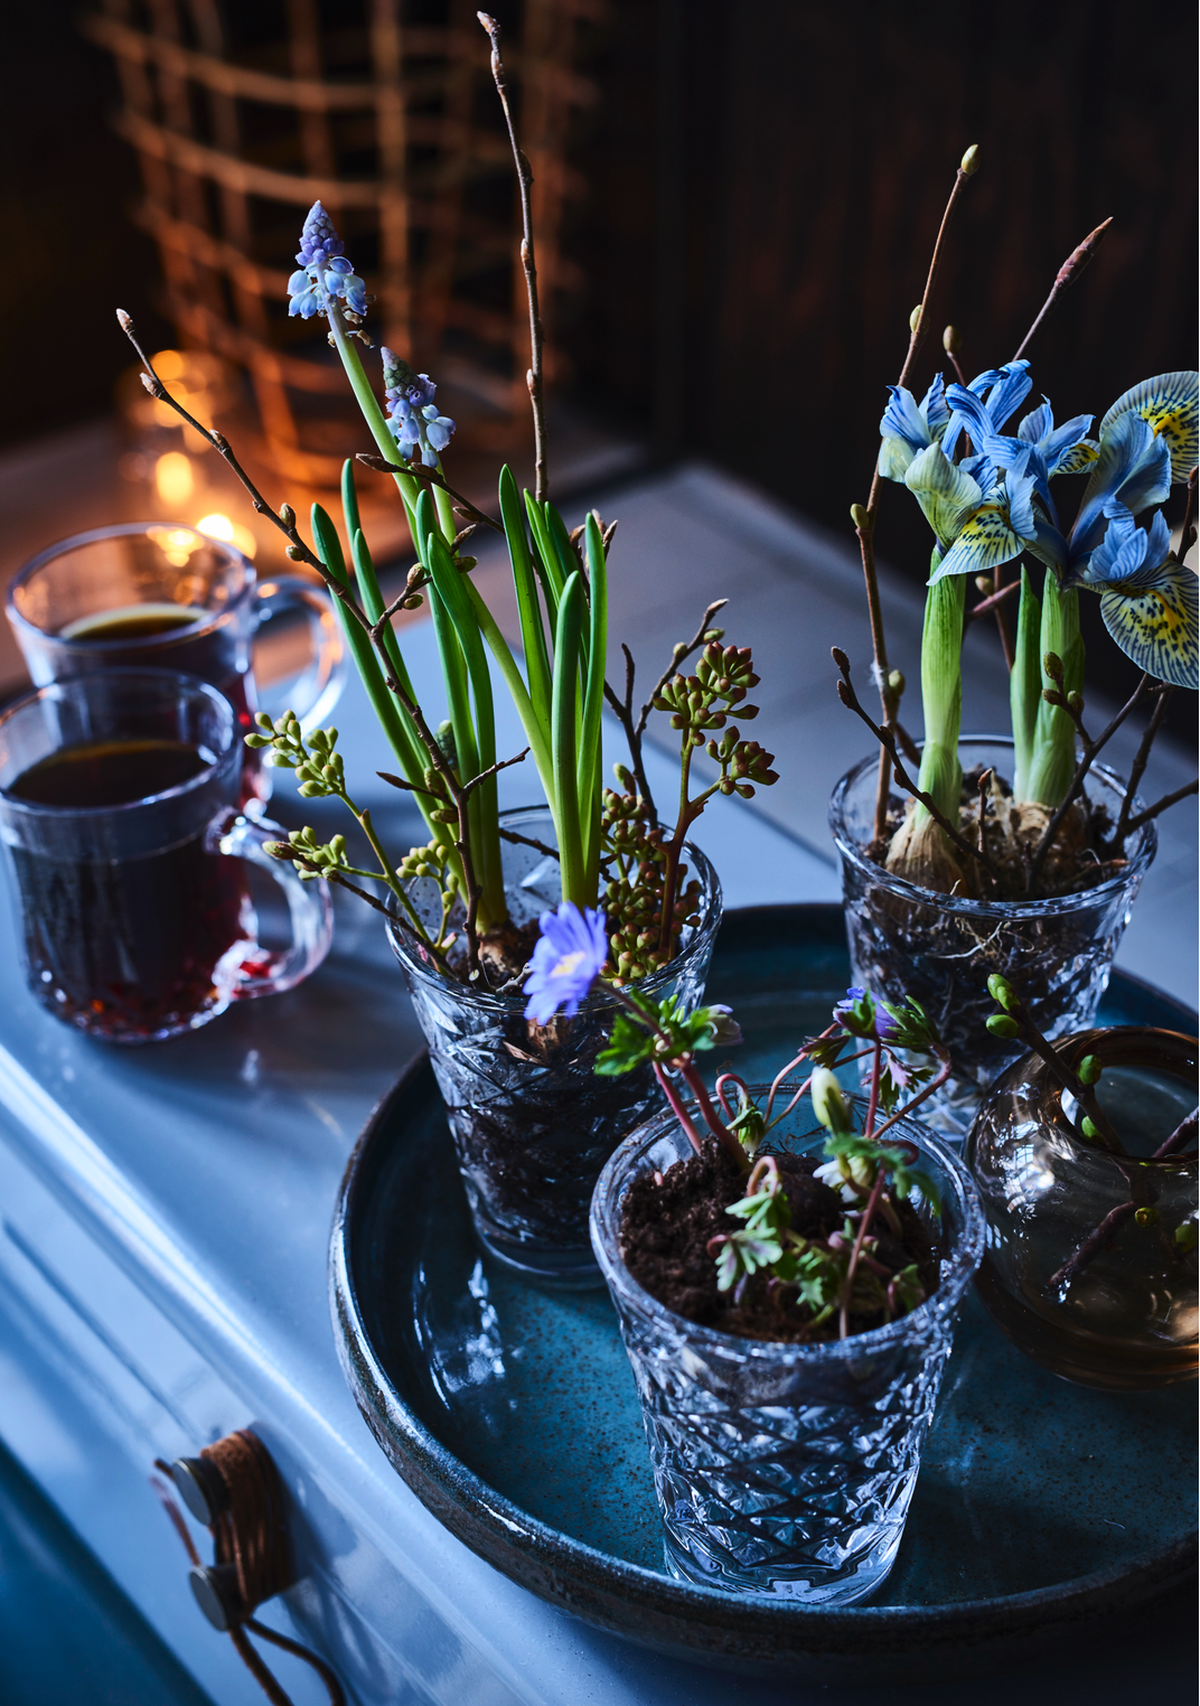 Pernille Albers - Nick Degn Fotografi Isabellas magasin - decorate with flowers and nordic design